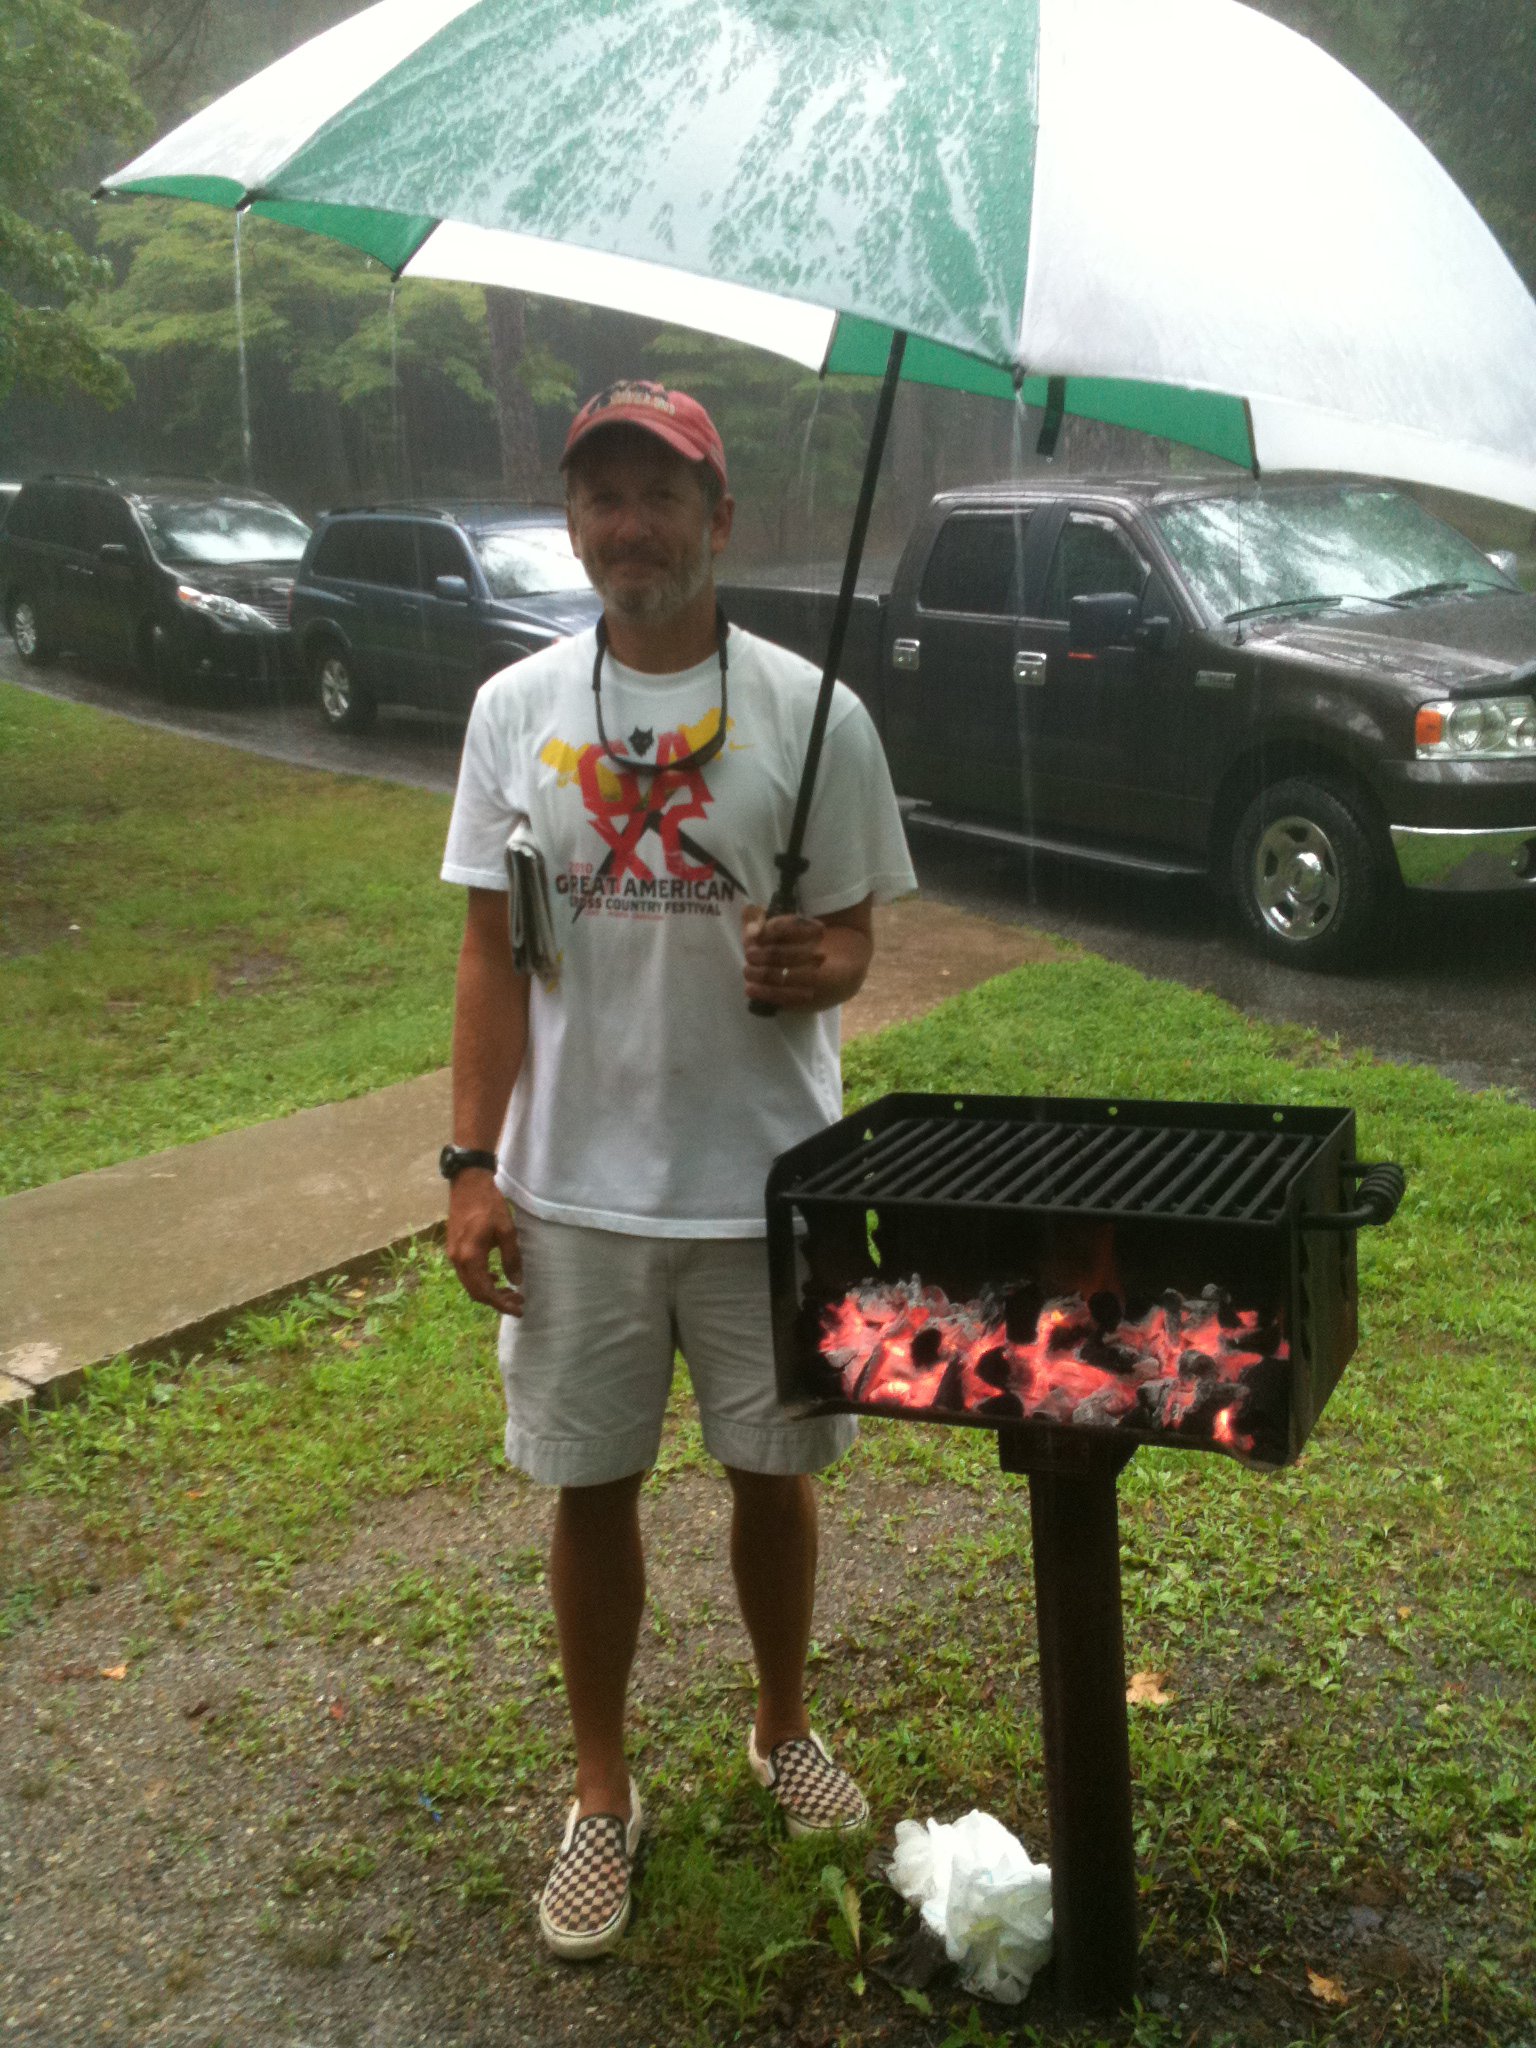 Give this man a medal for dedication to grilling!